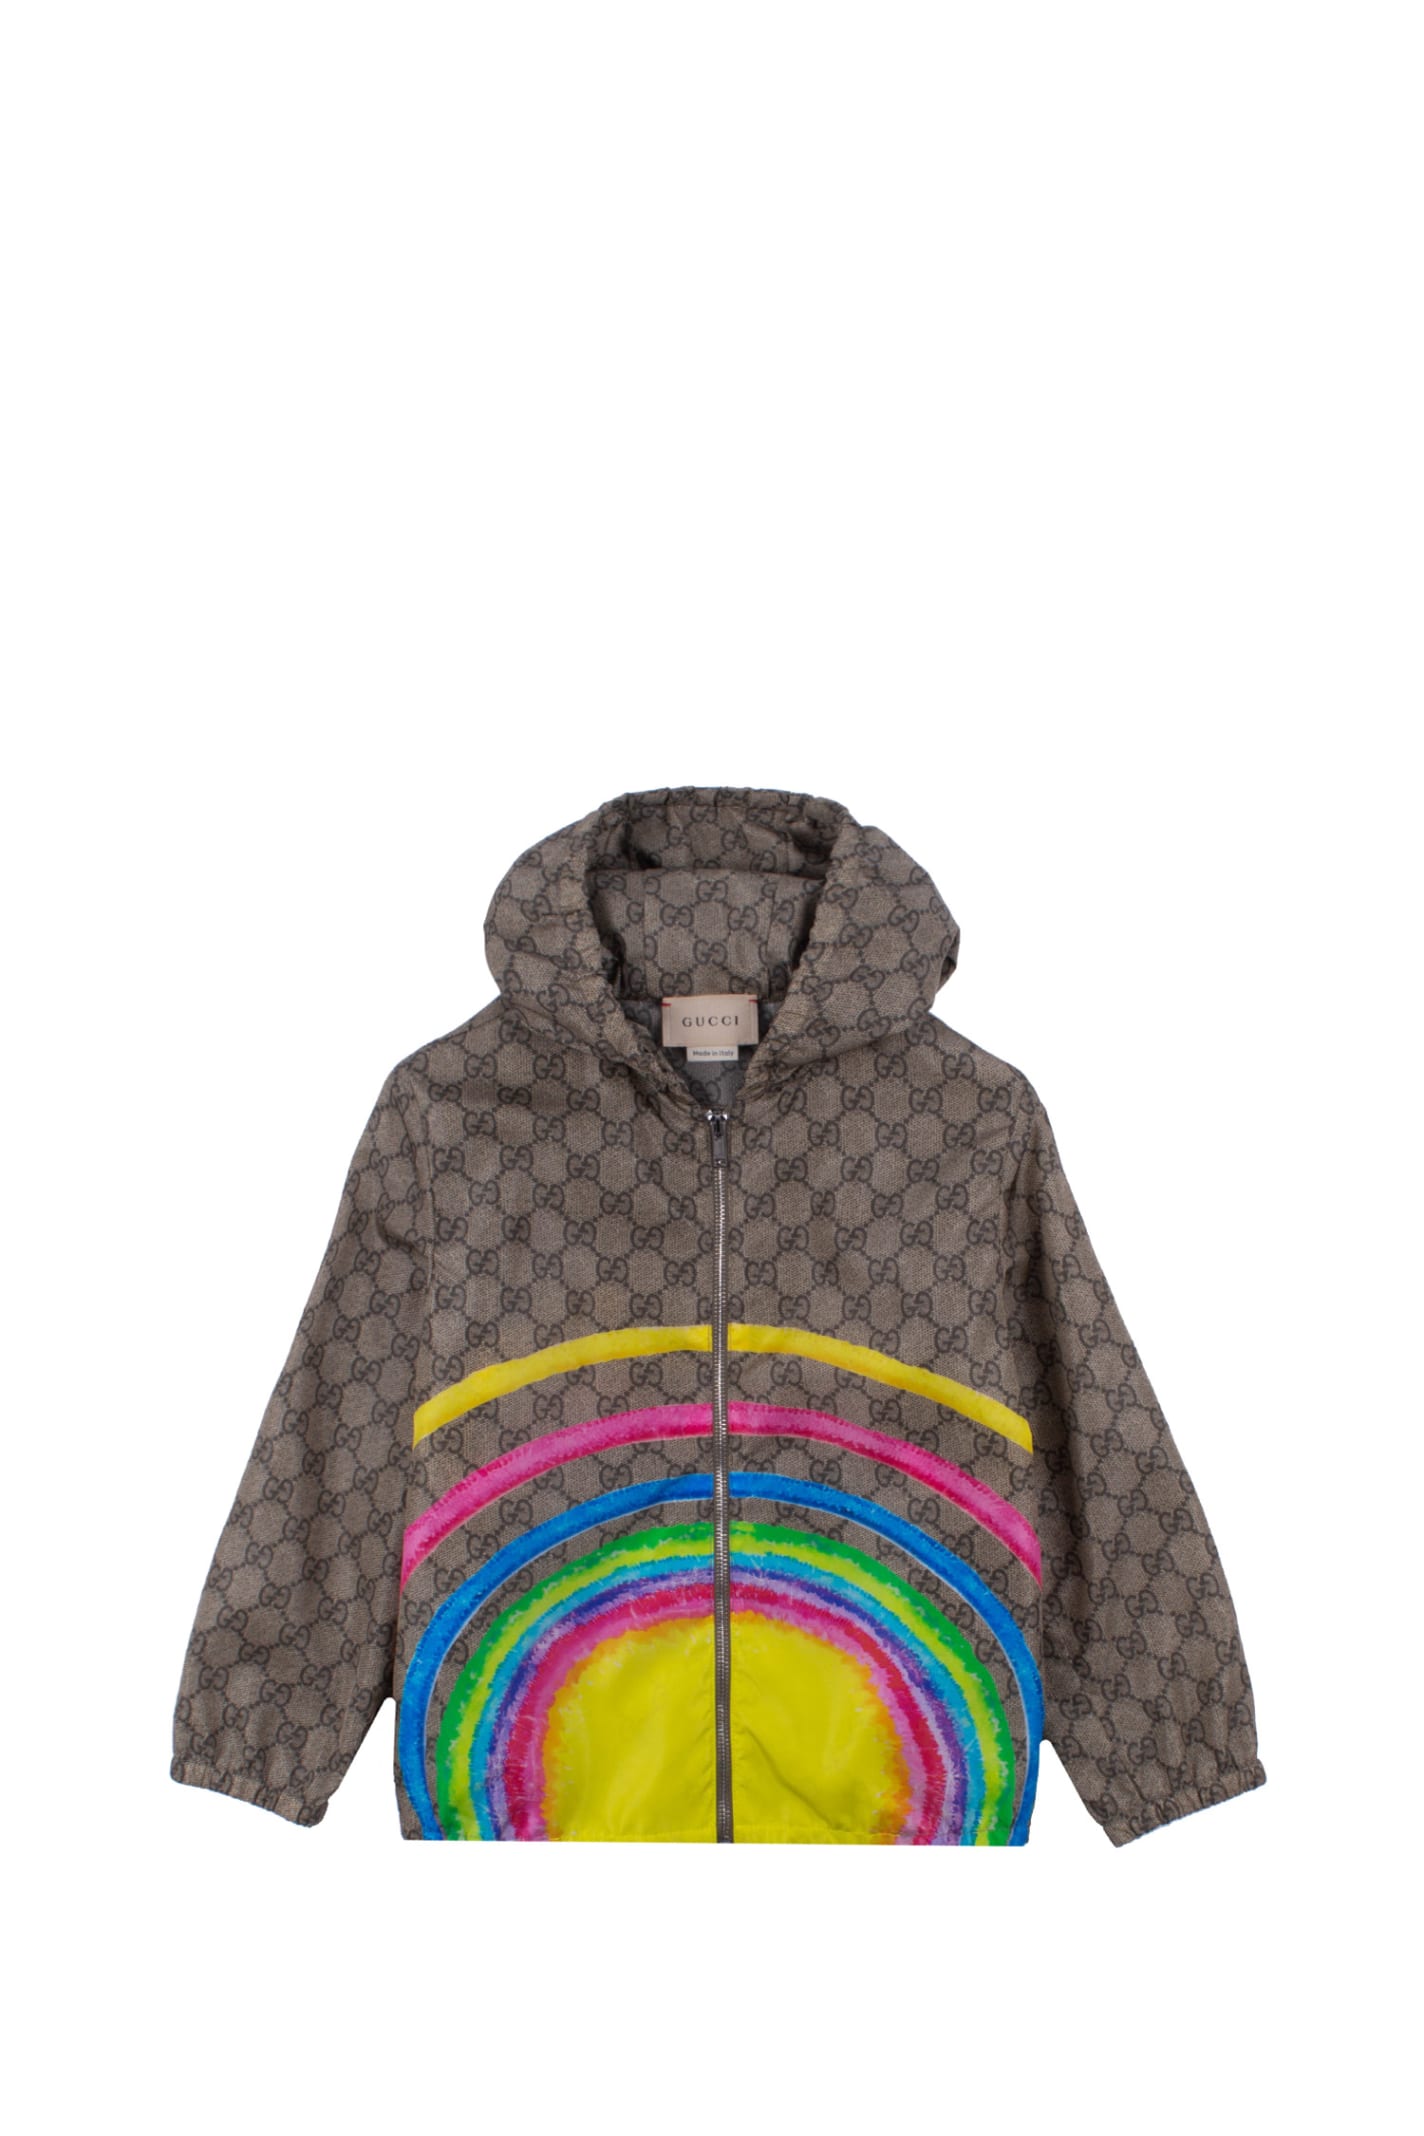 Gucci Nylon Jacket With Zip And Cat Print